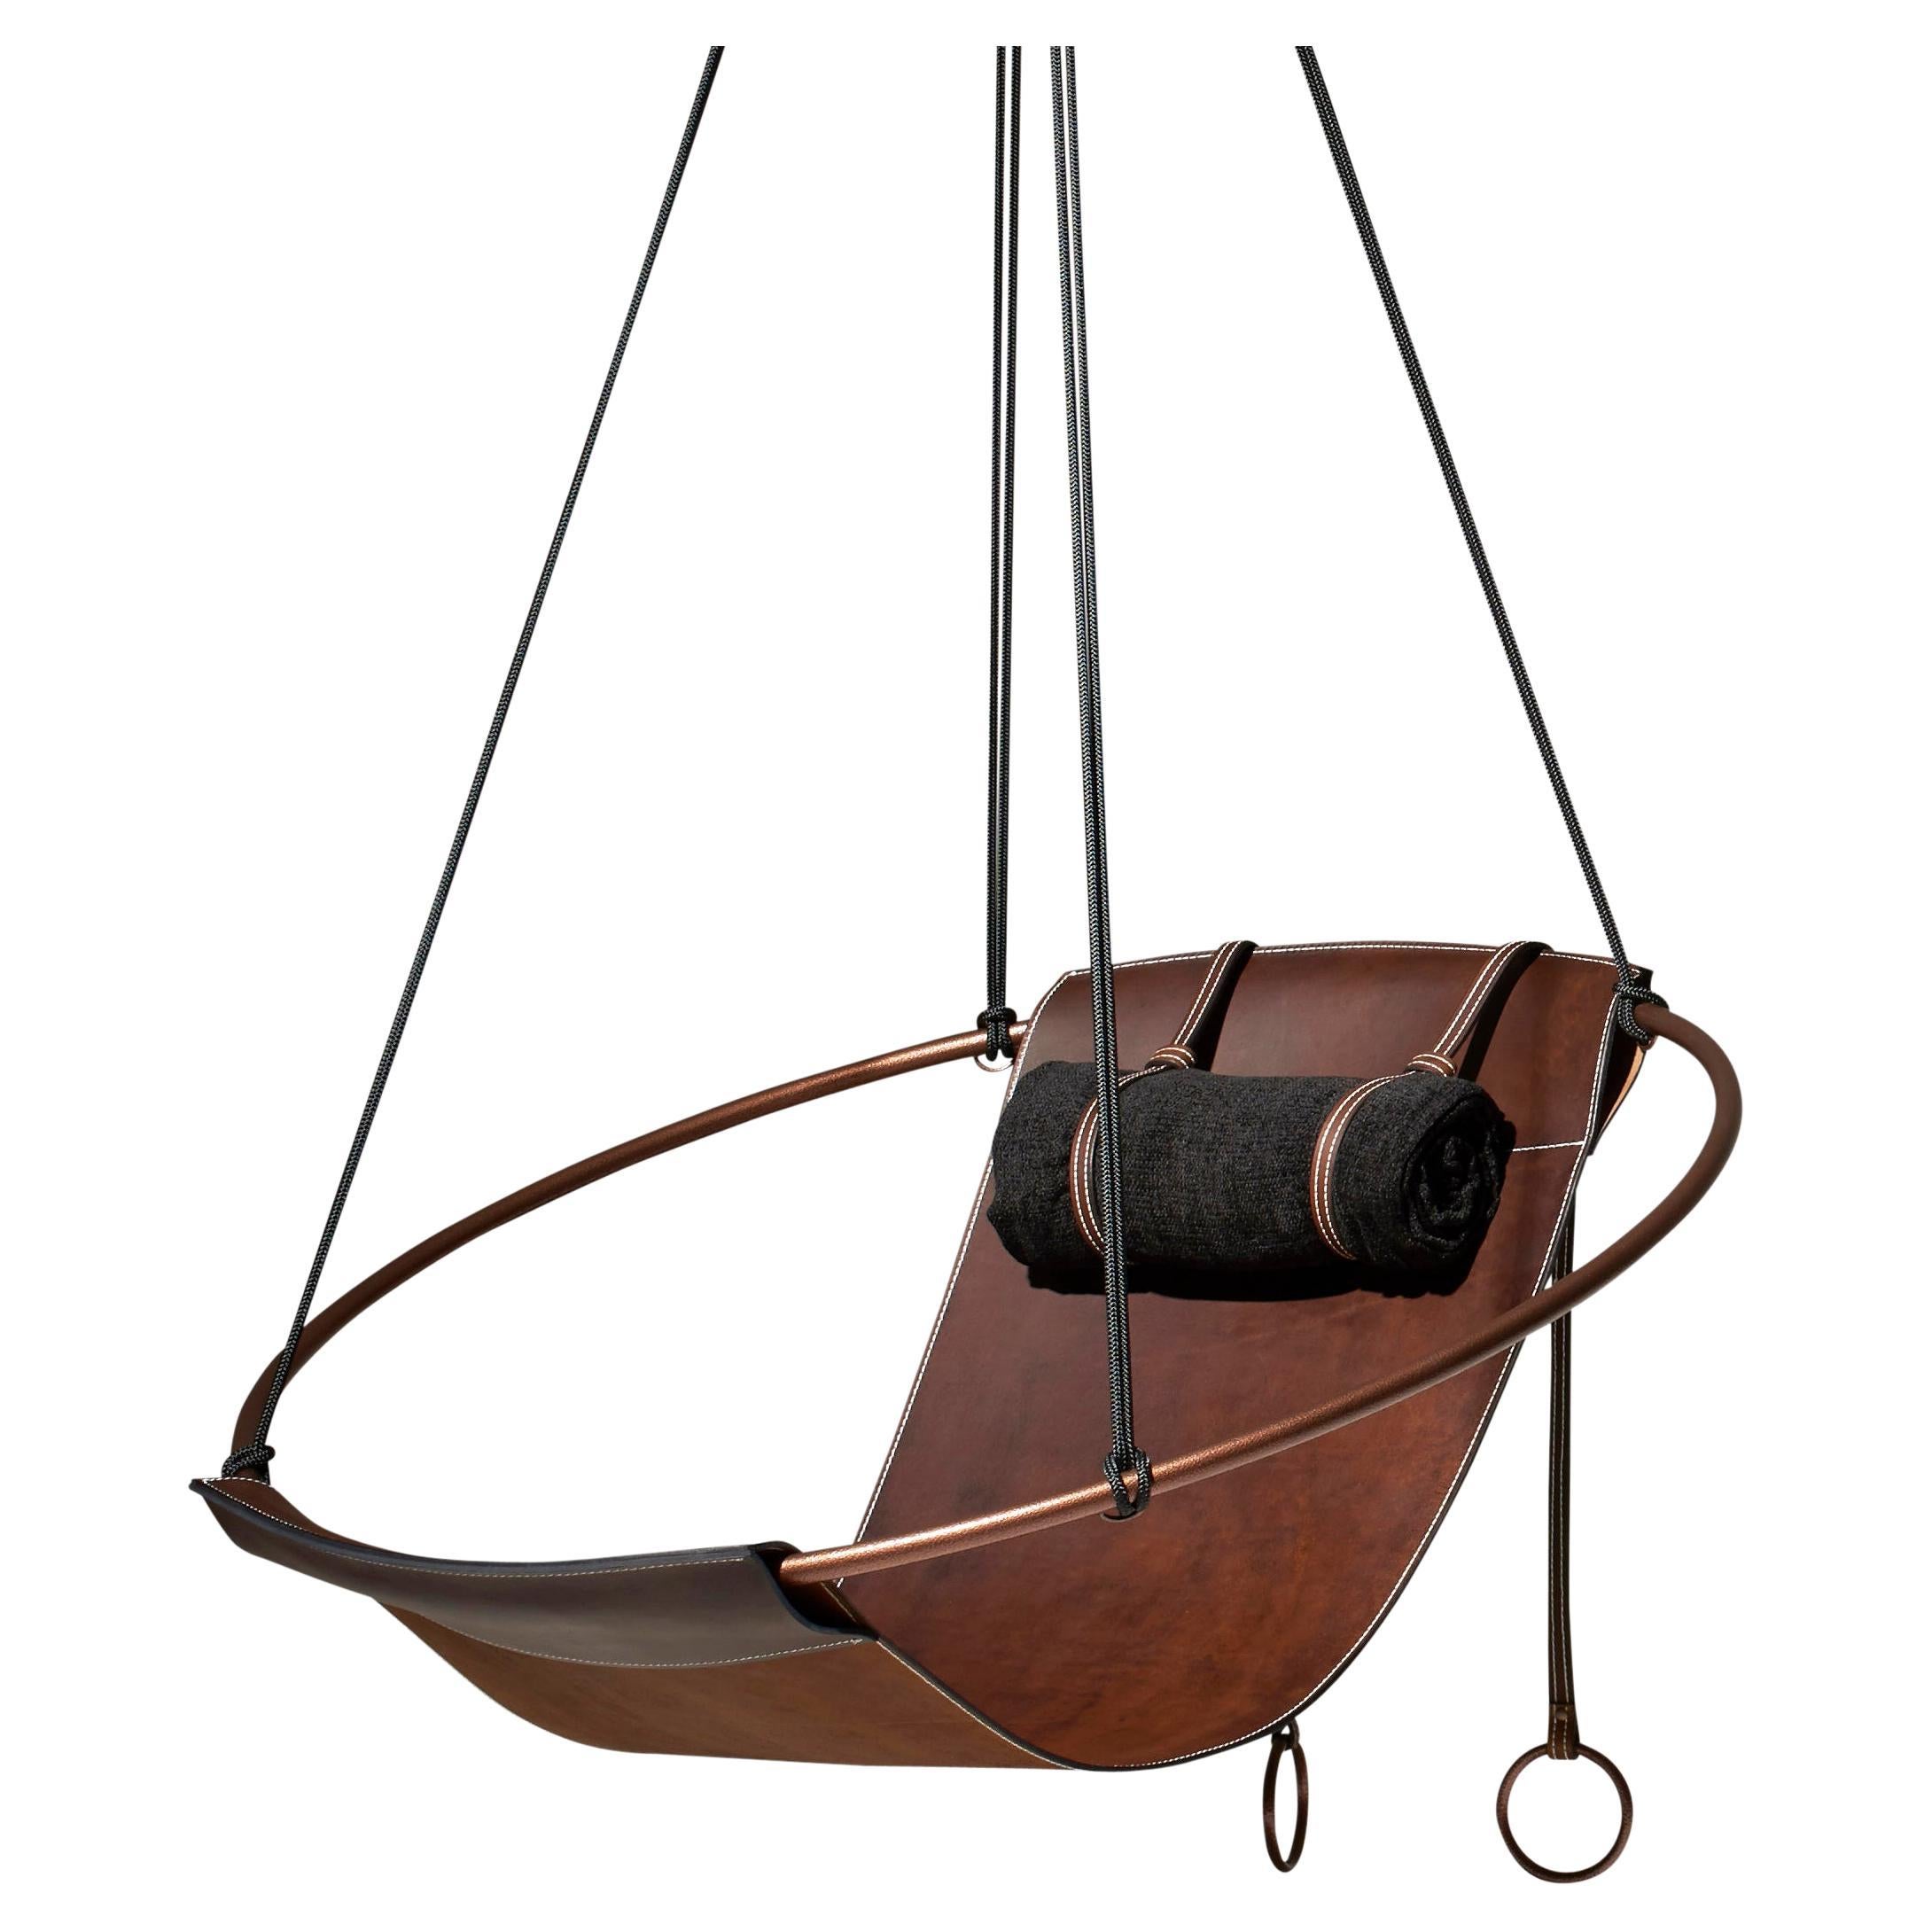 Modern, Rustic African Leather Hanging Sling Swing Chair For Sale